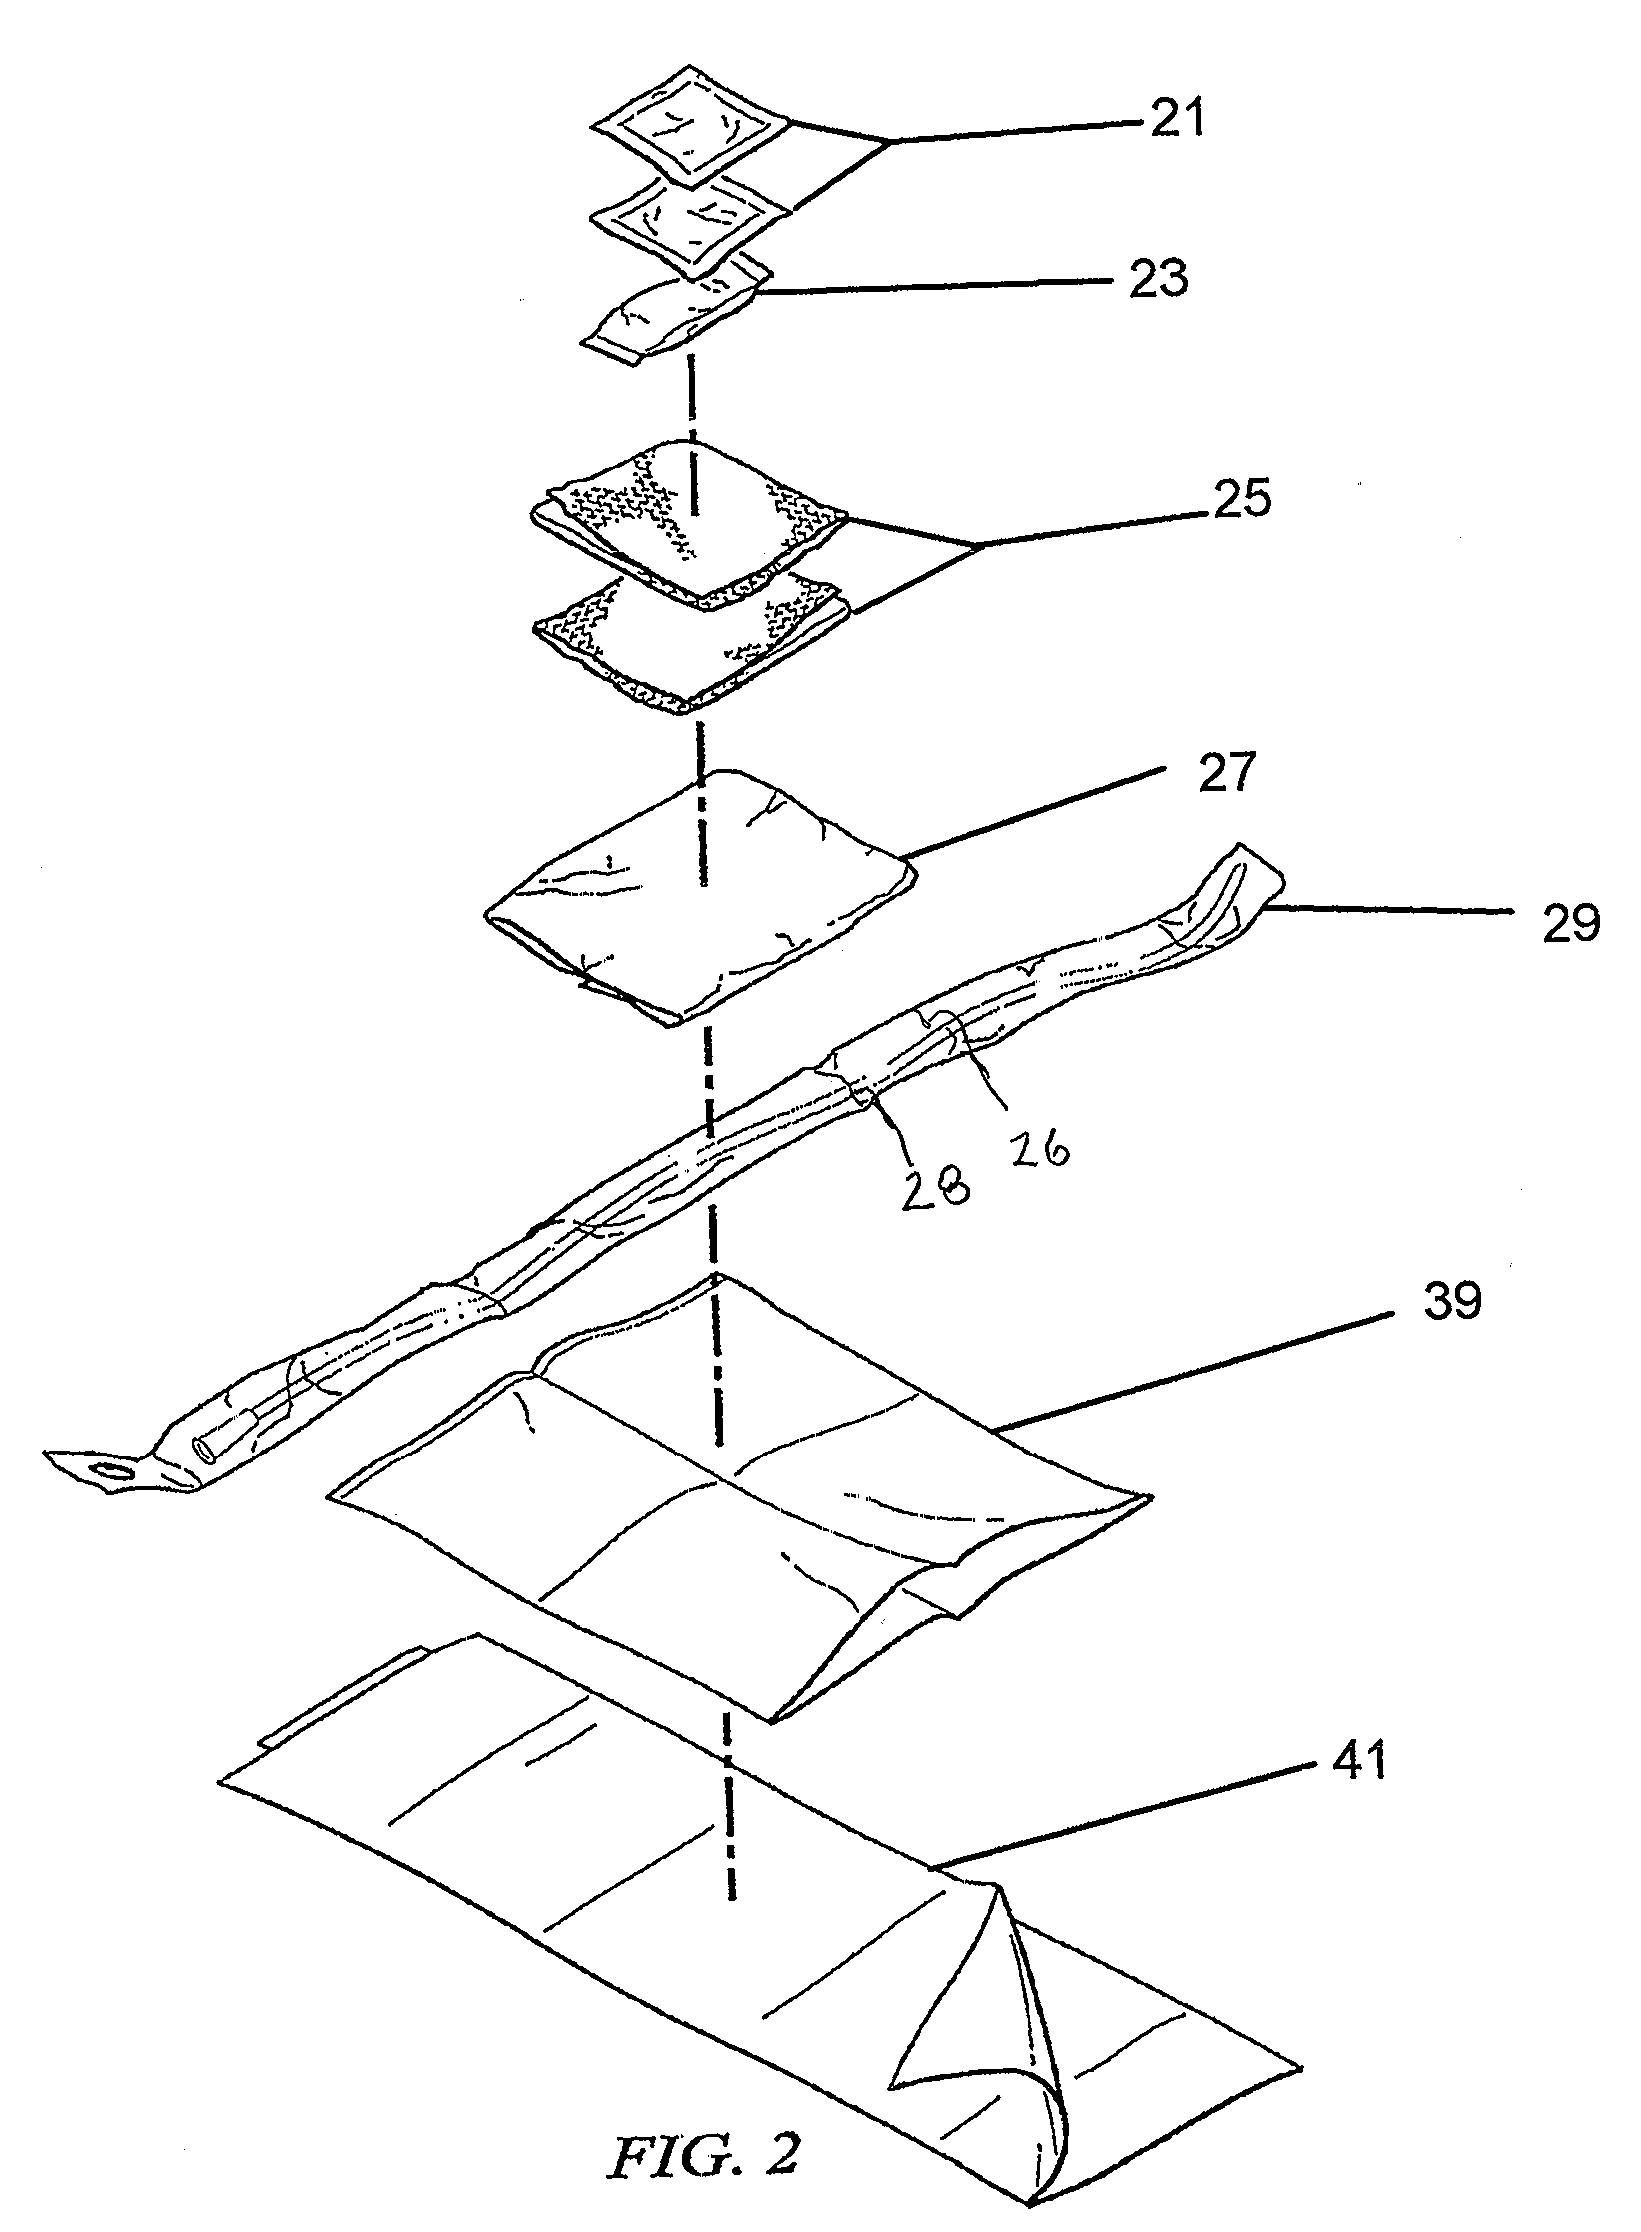 Urinary catheter, catheter packaging assembly and method of use